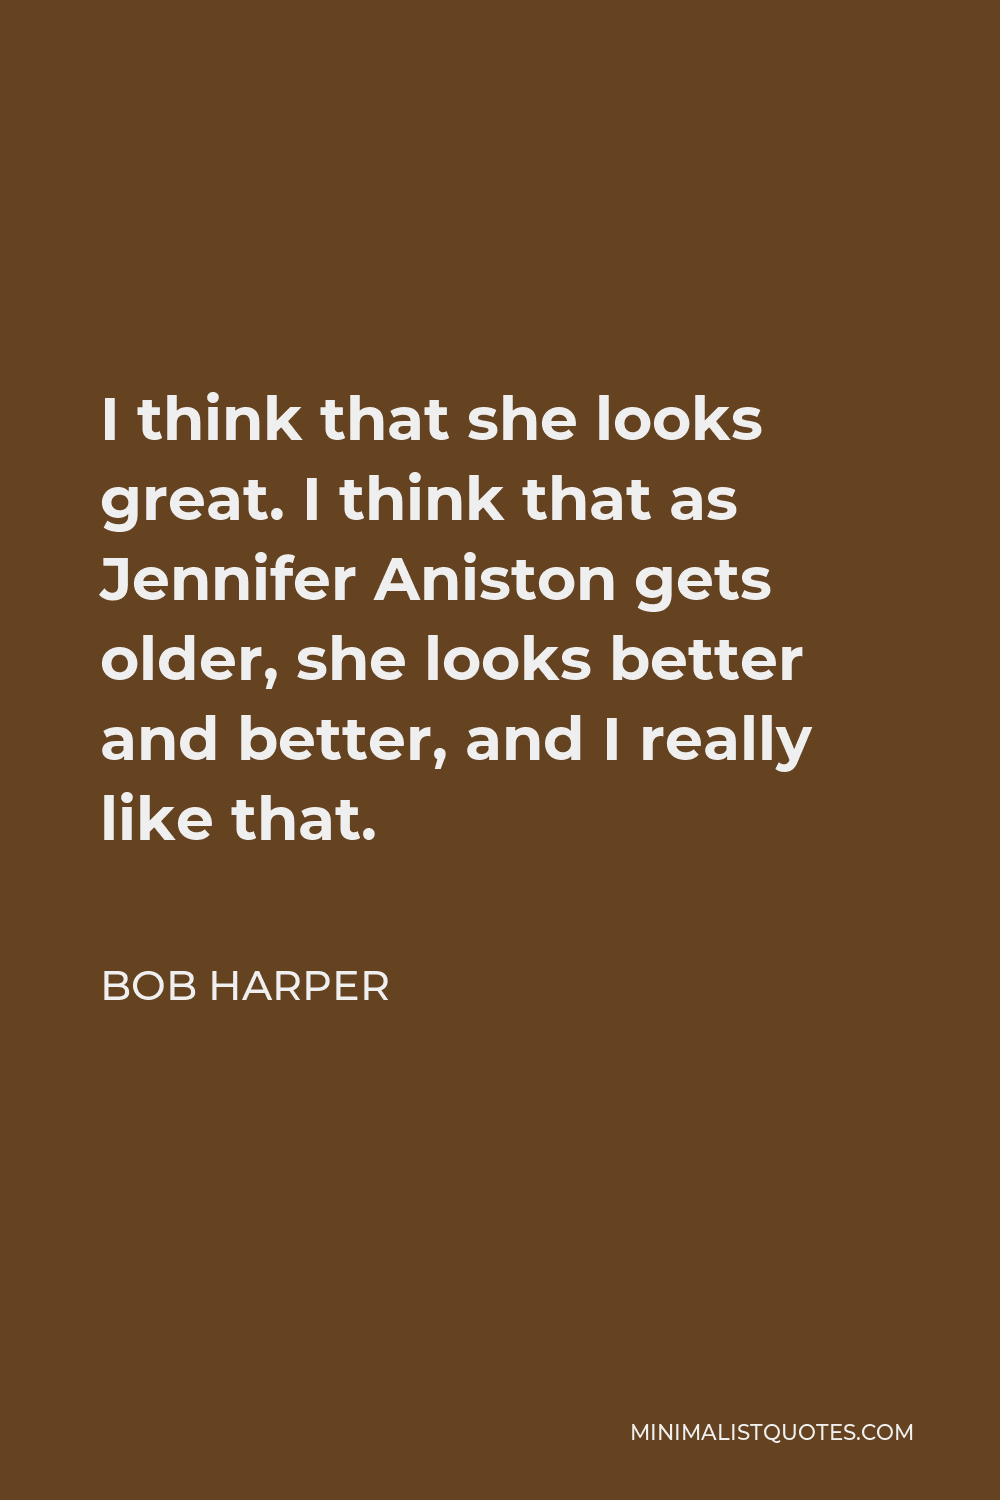 Bob Harper Quote - I think that she looks great. I think that as Jennifer Aniston gets older, she looks better and better, and I really like that.